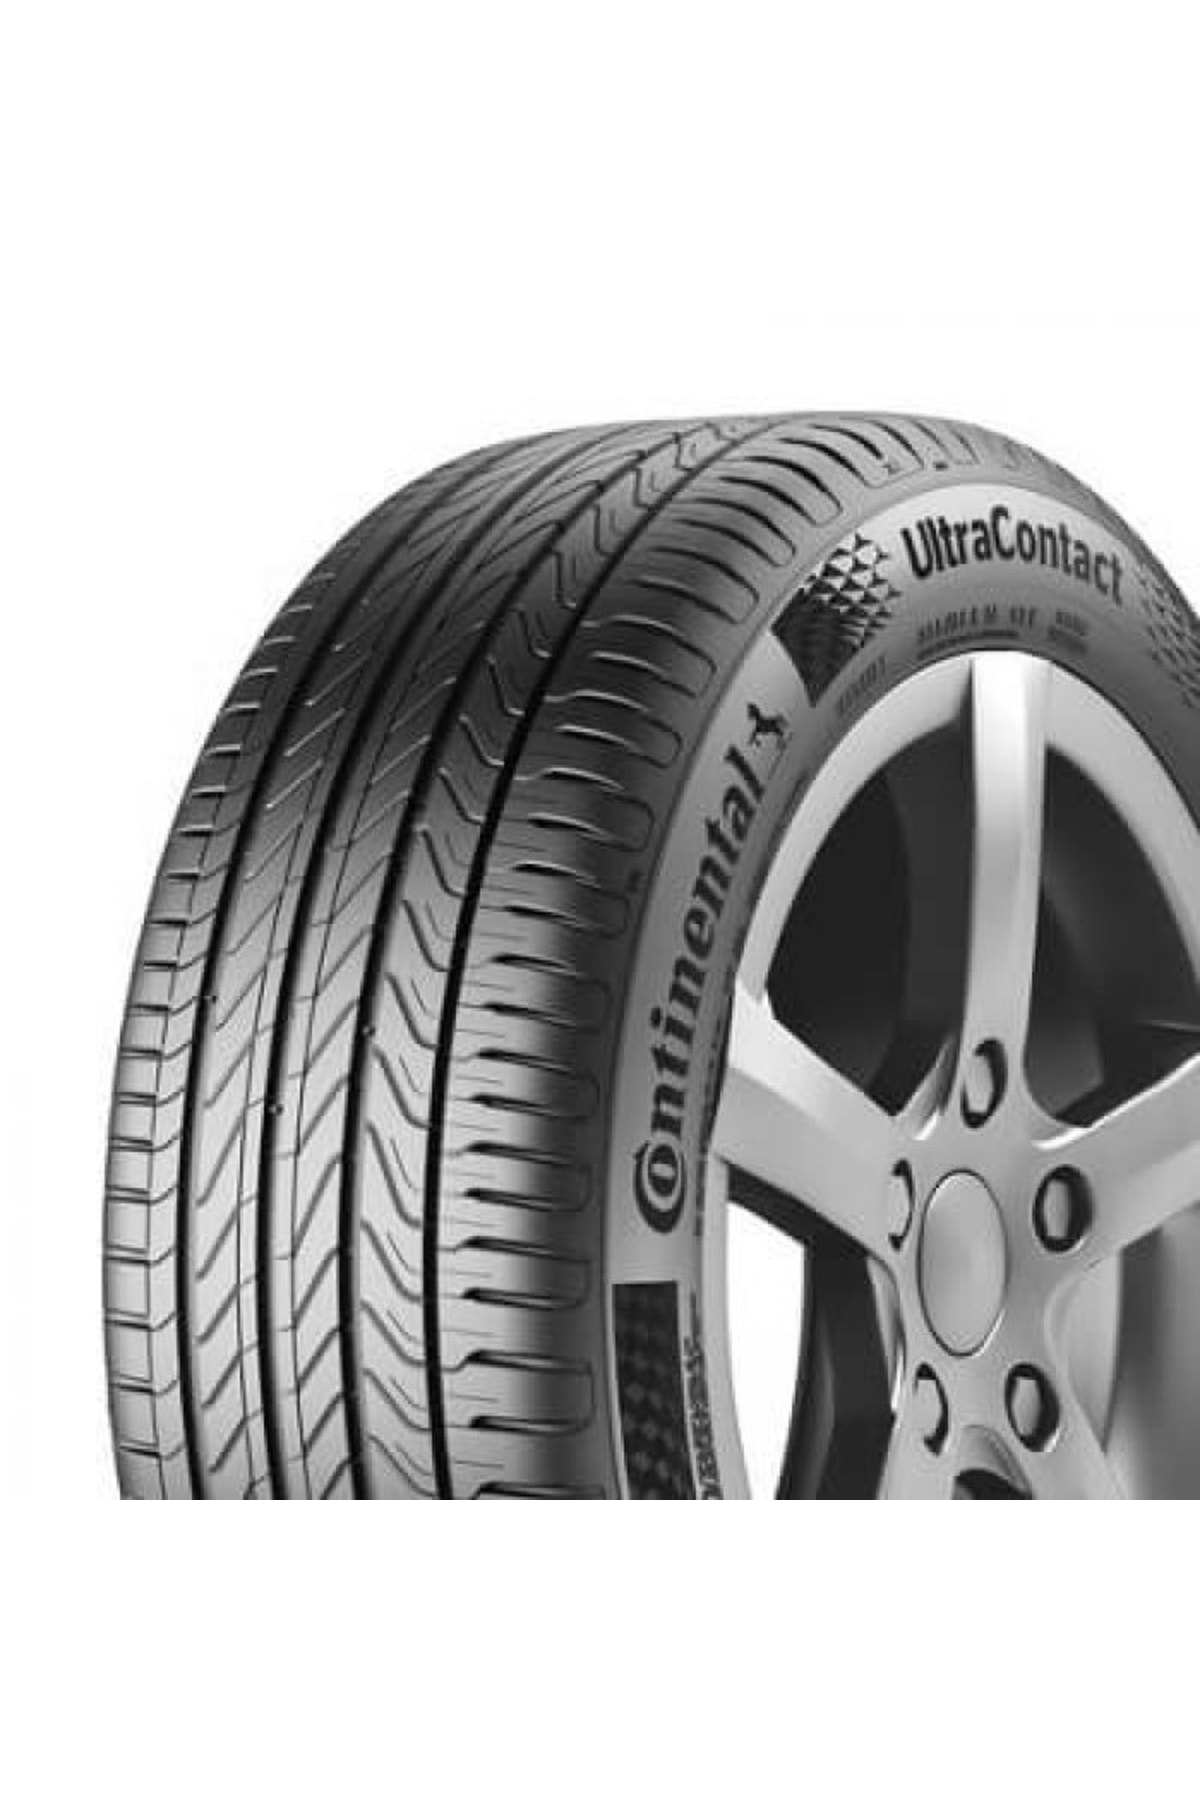 Continental Ultracontact 185/65r15 88t